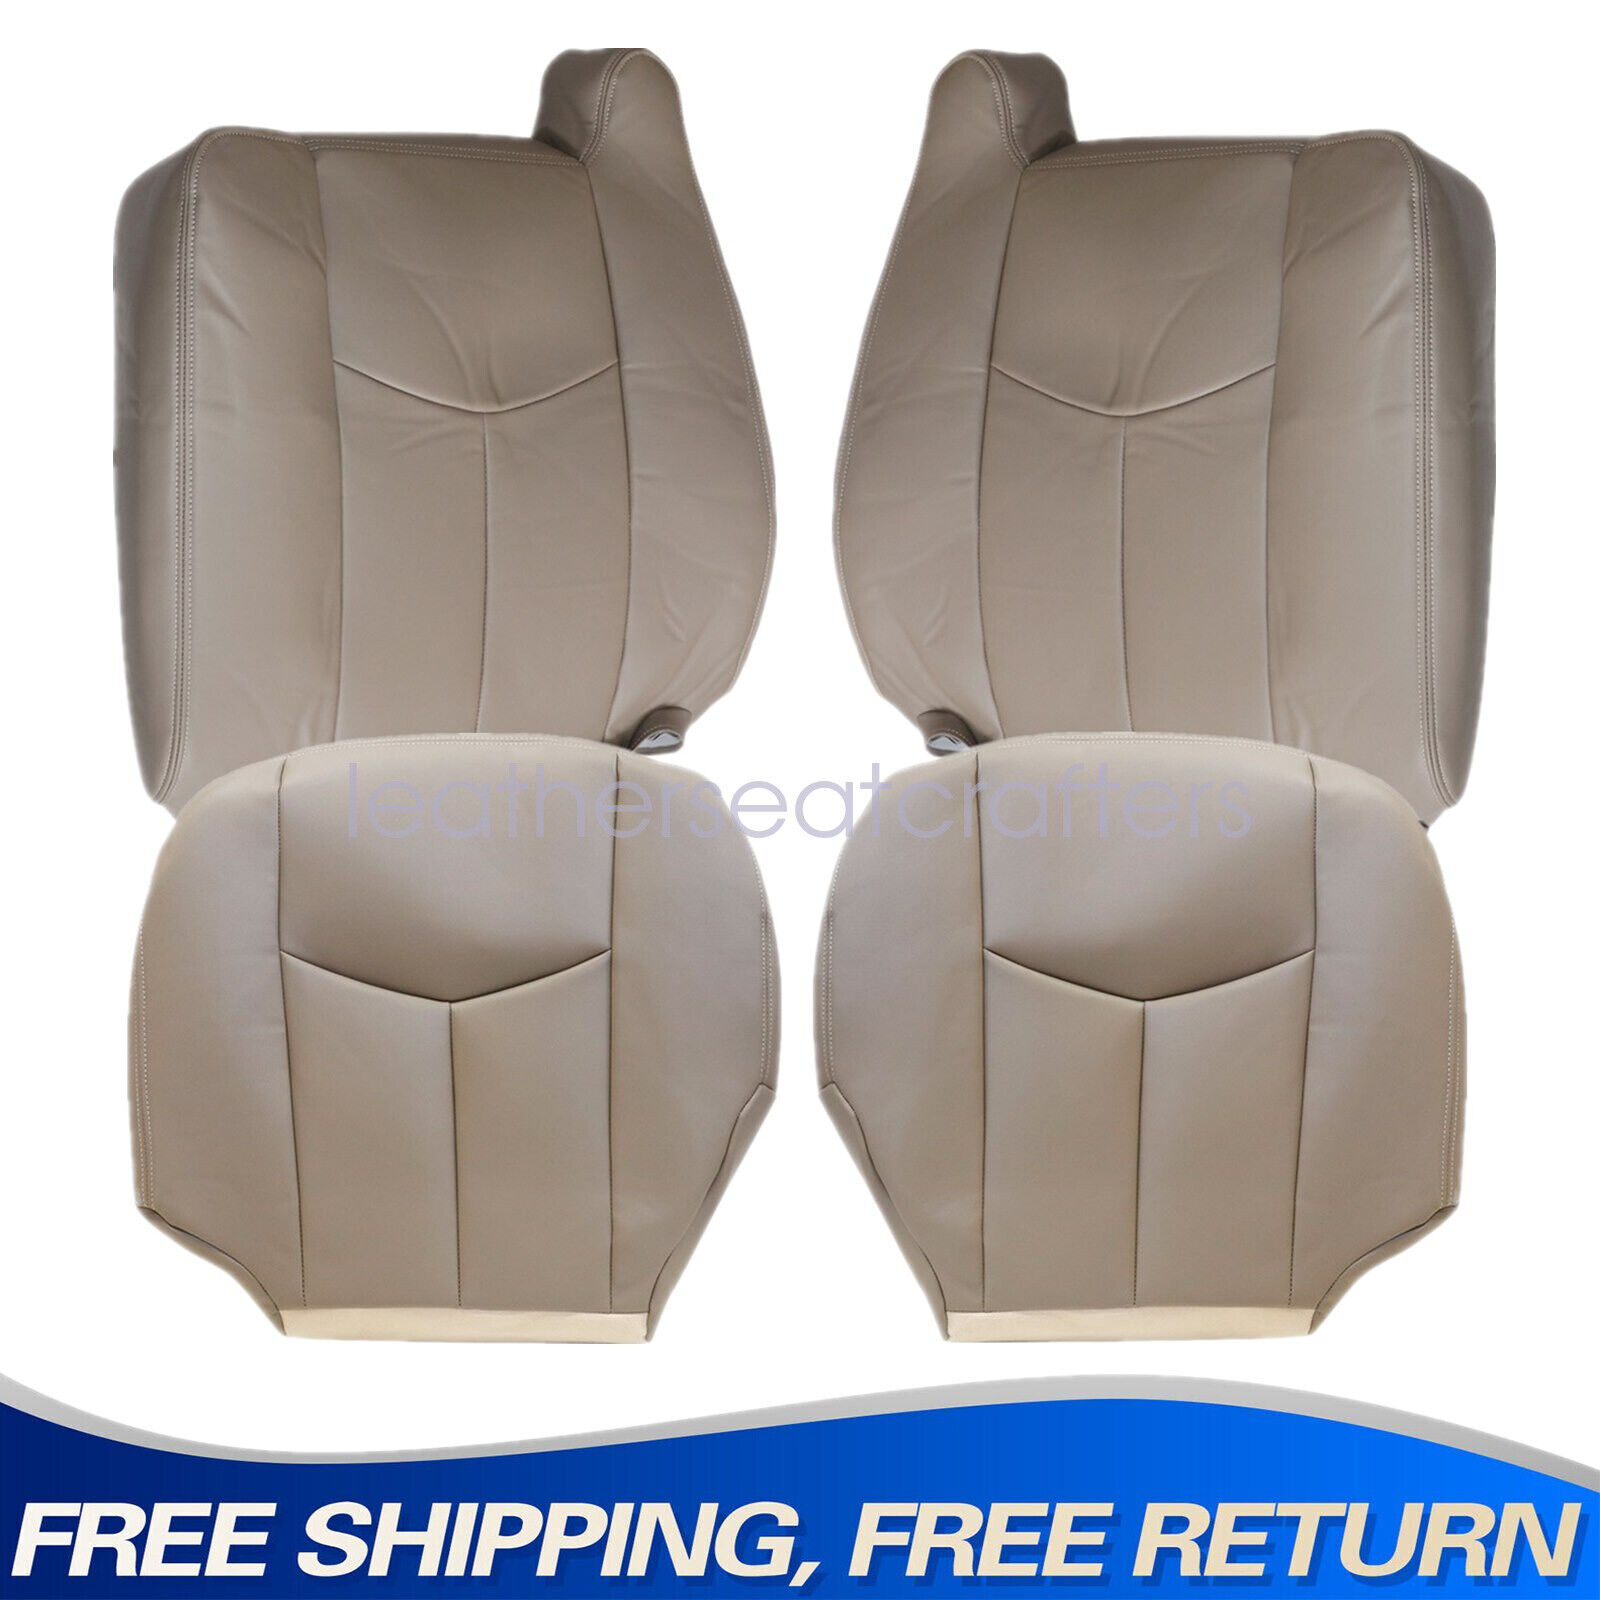 Front Both Side Leather Seat Cover Tan For 2003-2006 Chevy Silverado No Armrest